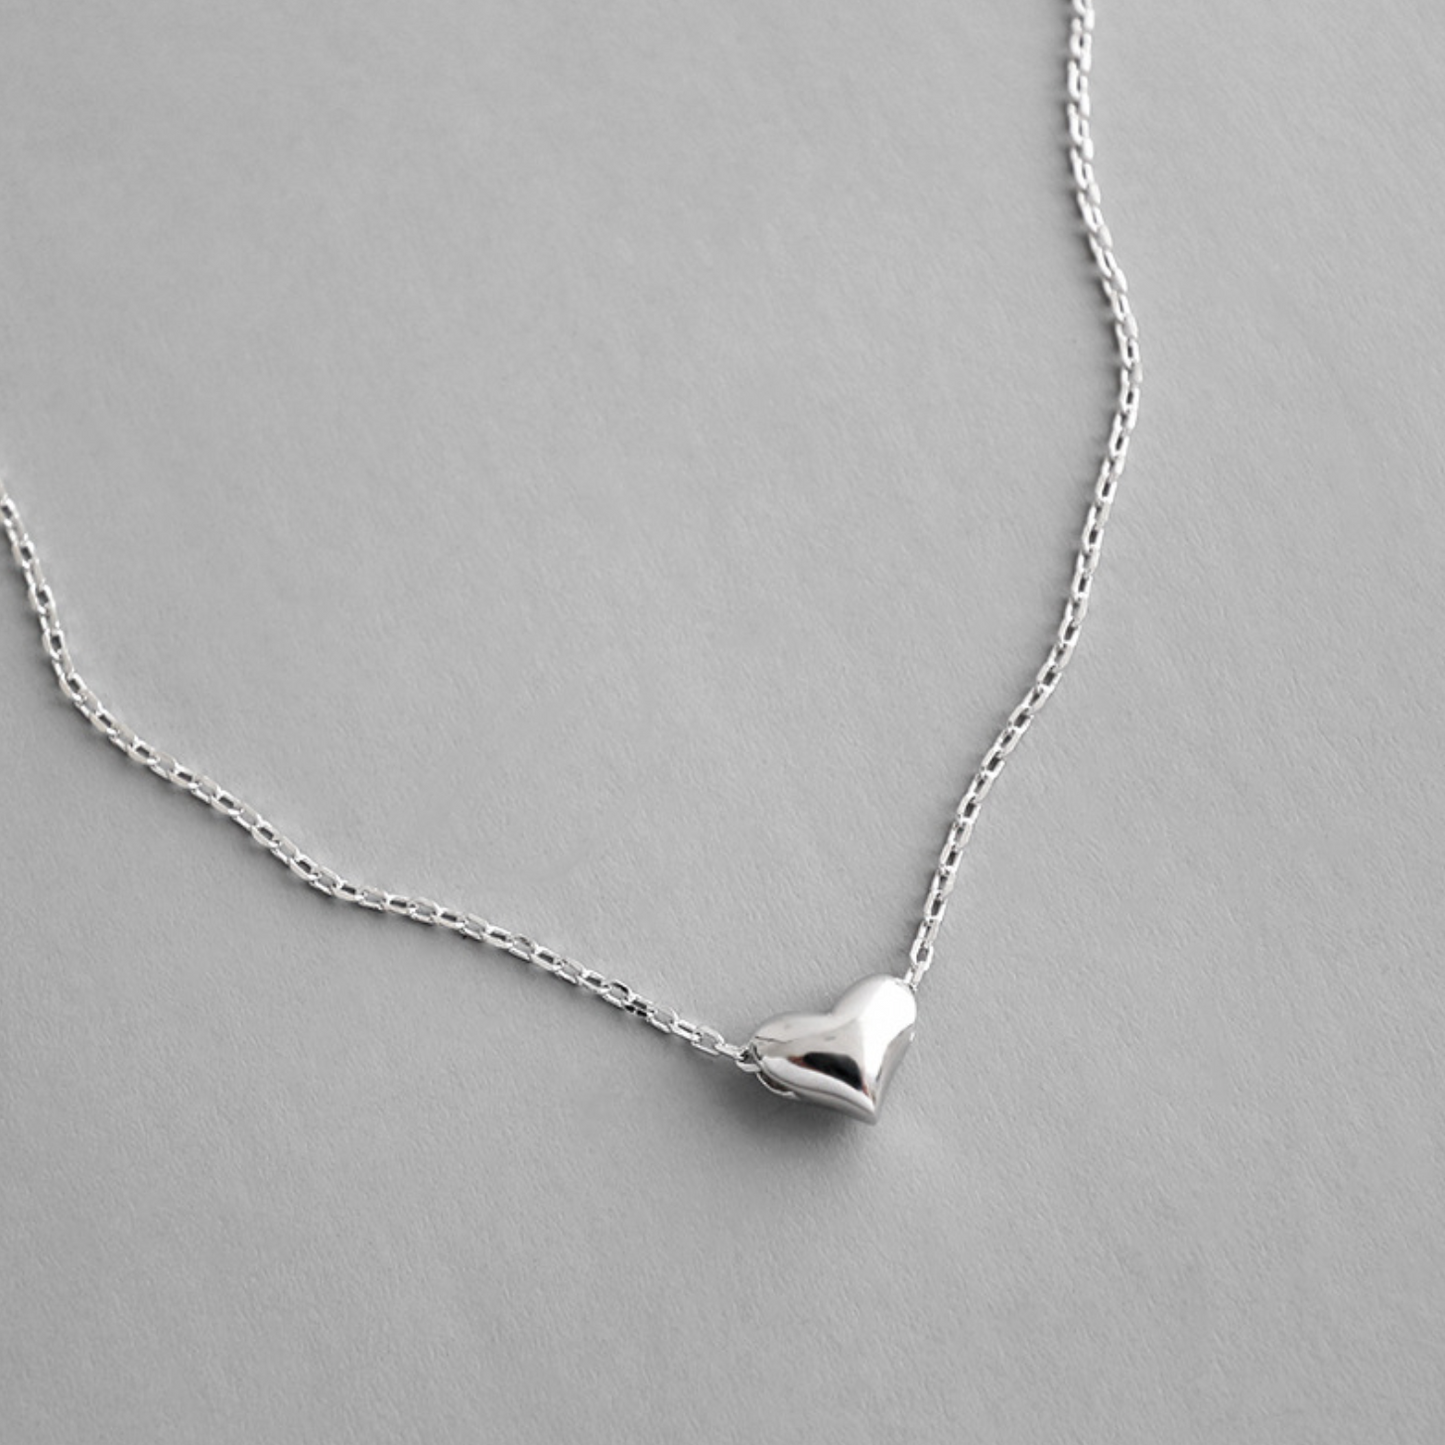 Dainty Silver Heart Pendant Necklace